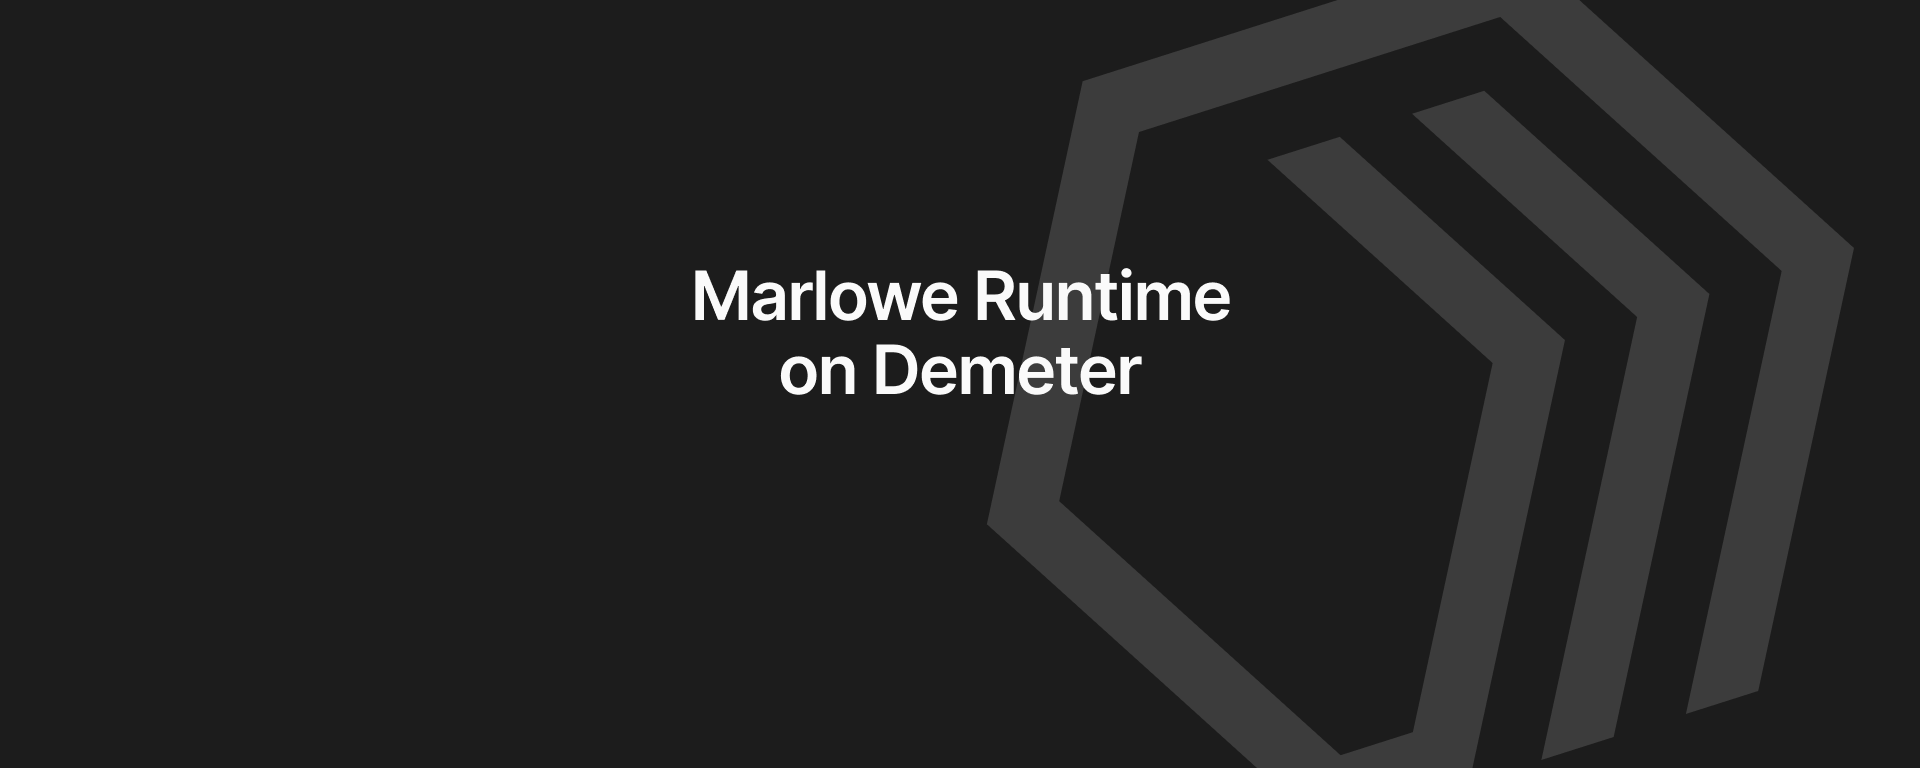 Marlowe Runtime on Demeter: the power of cloud-based infrastructure